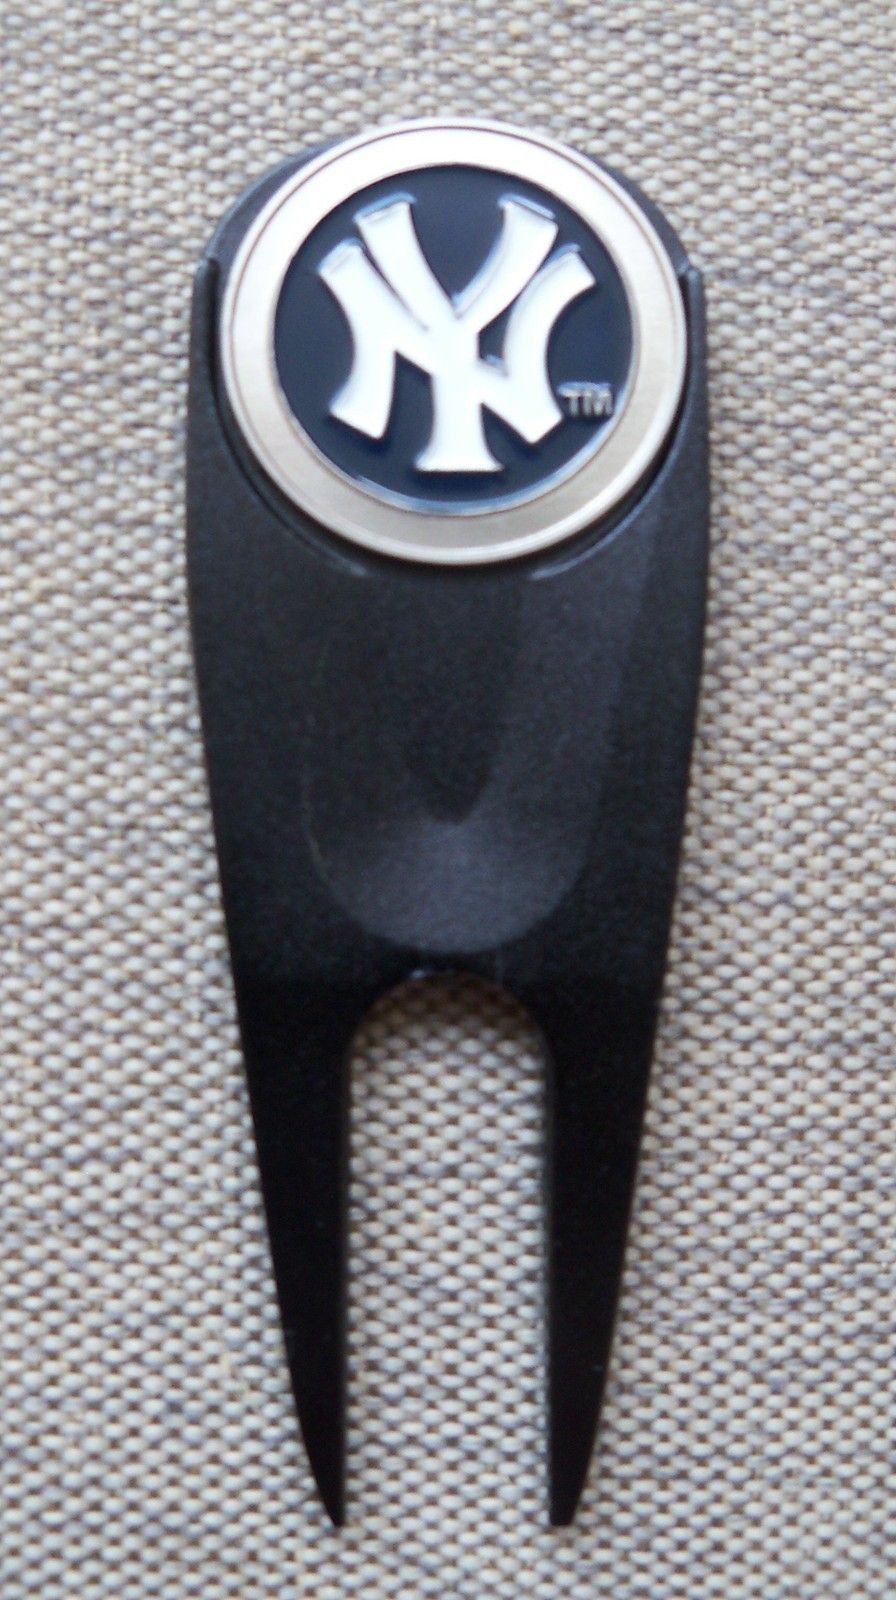 New York NY Yankees Magnetic Divot Tool and Removable Golf Ball Marker